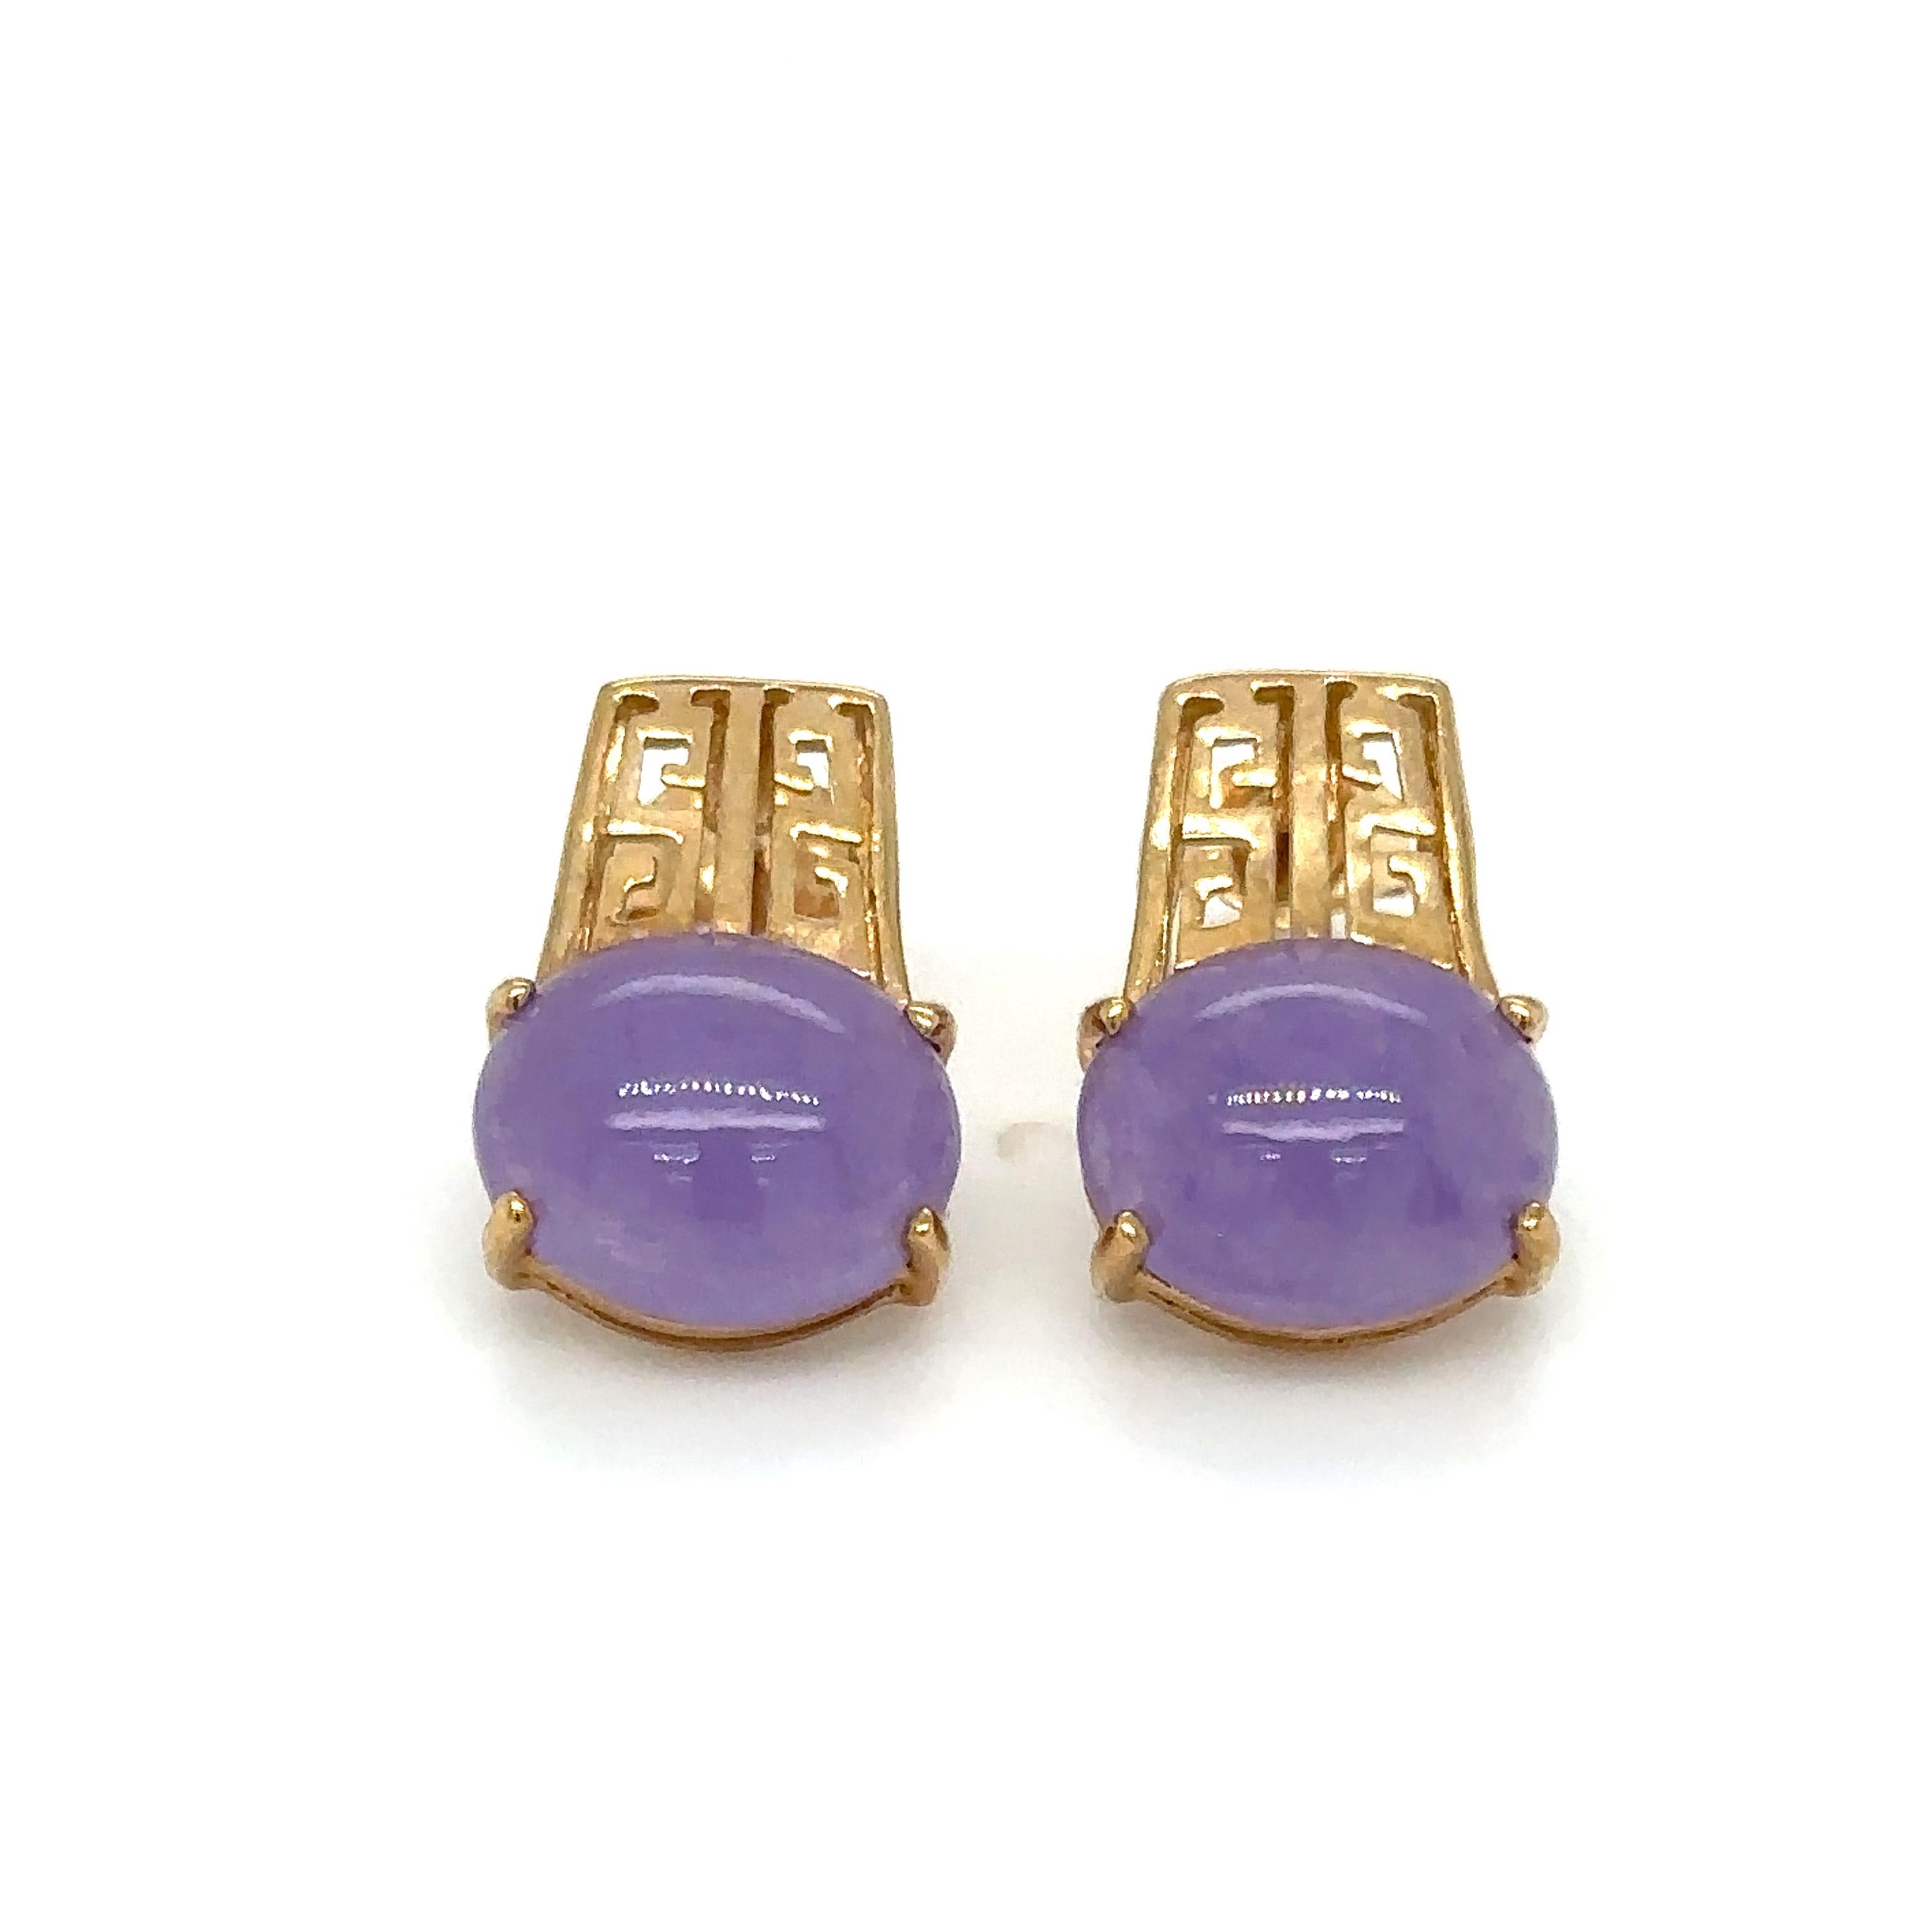 Item Details: These 14 Karat gold earrings with oval purple jade have a Greek key-style design. They have oval gemstones set horizontally with a geometric design above. These are beautiful retro earrings and are perfect for a lover of mid-century